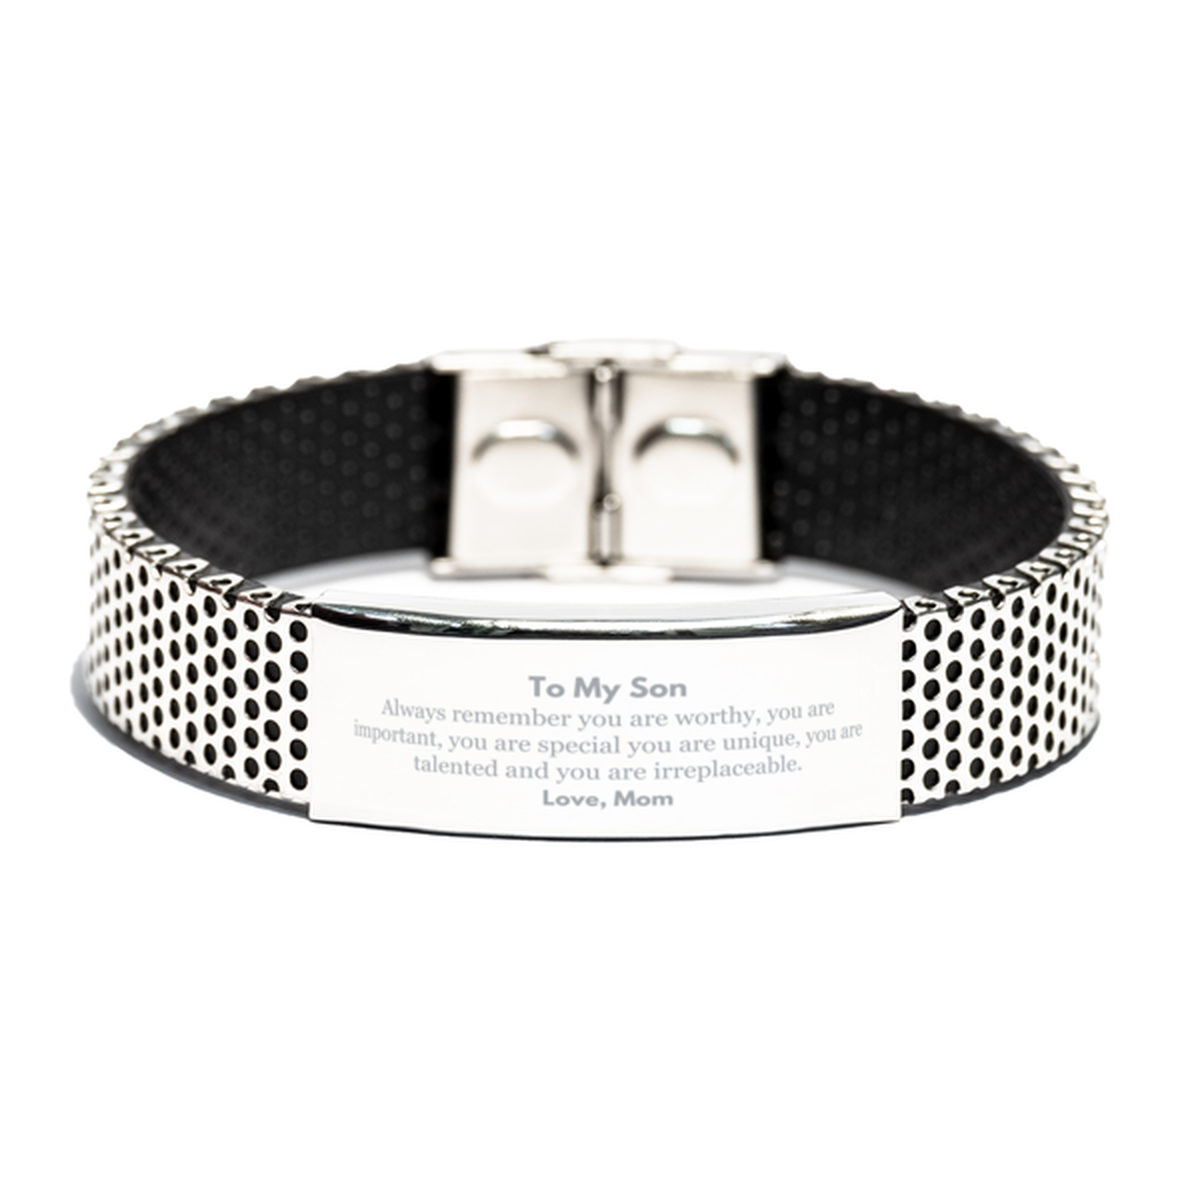 Son Birthday Gifts from Mom, Inspirational Stainless Steel Bracelet for Son Christmas Graduation Gifts for Son Always remember you are worthy, you are important. Love, Mom